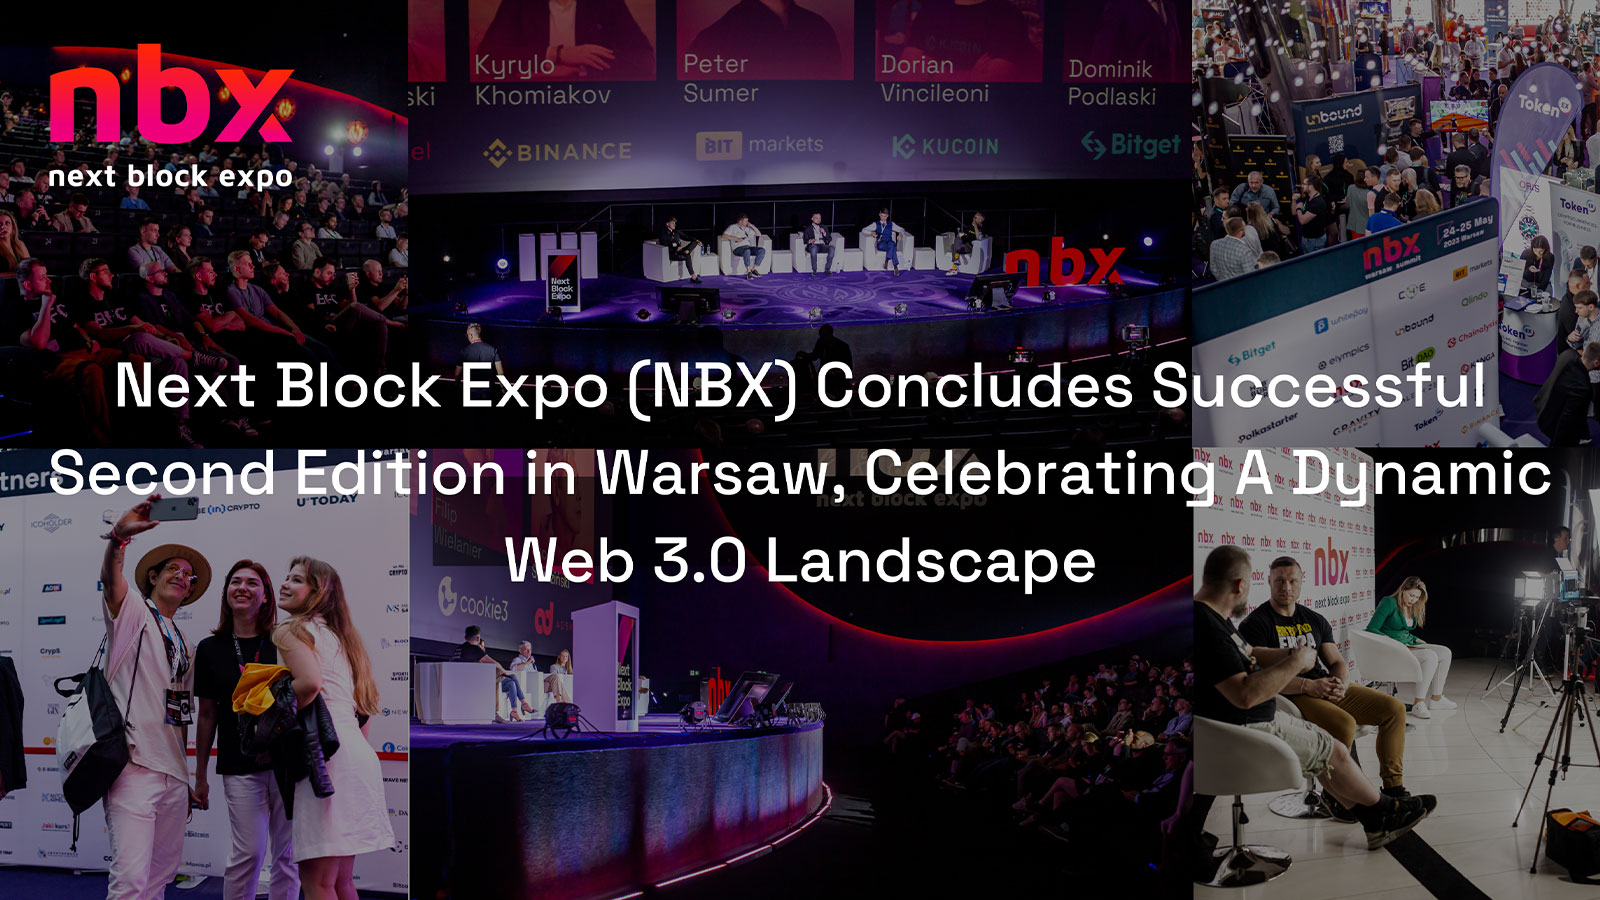 Next Block Expo (NBX) Concludes Successful Second Edition in Warsaw, Celebrating A Dynamic Web 3.0 Landscape